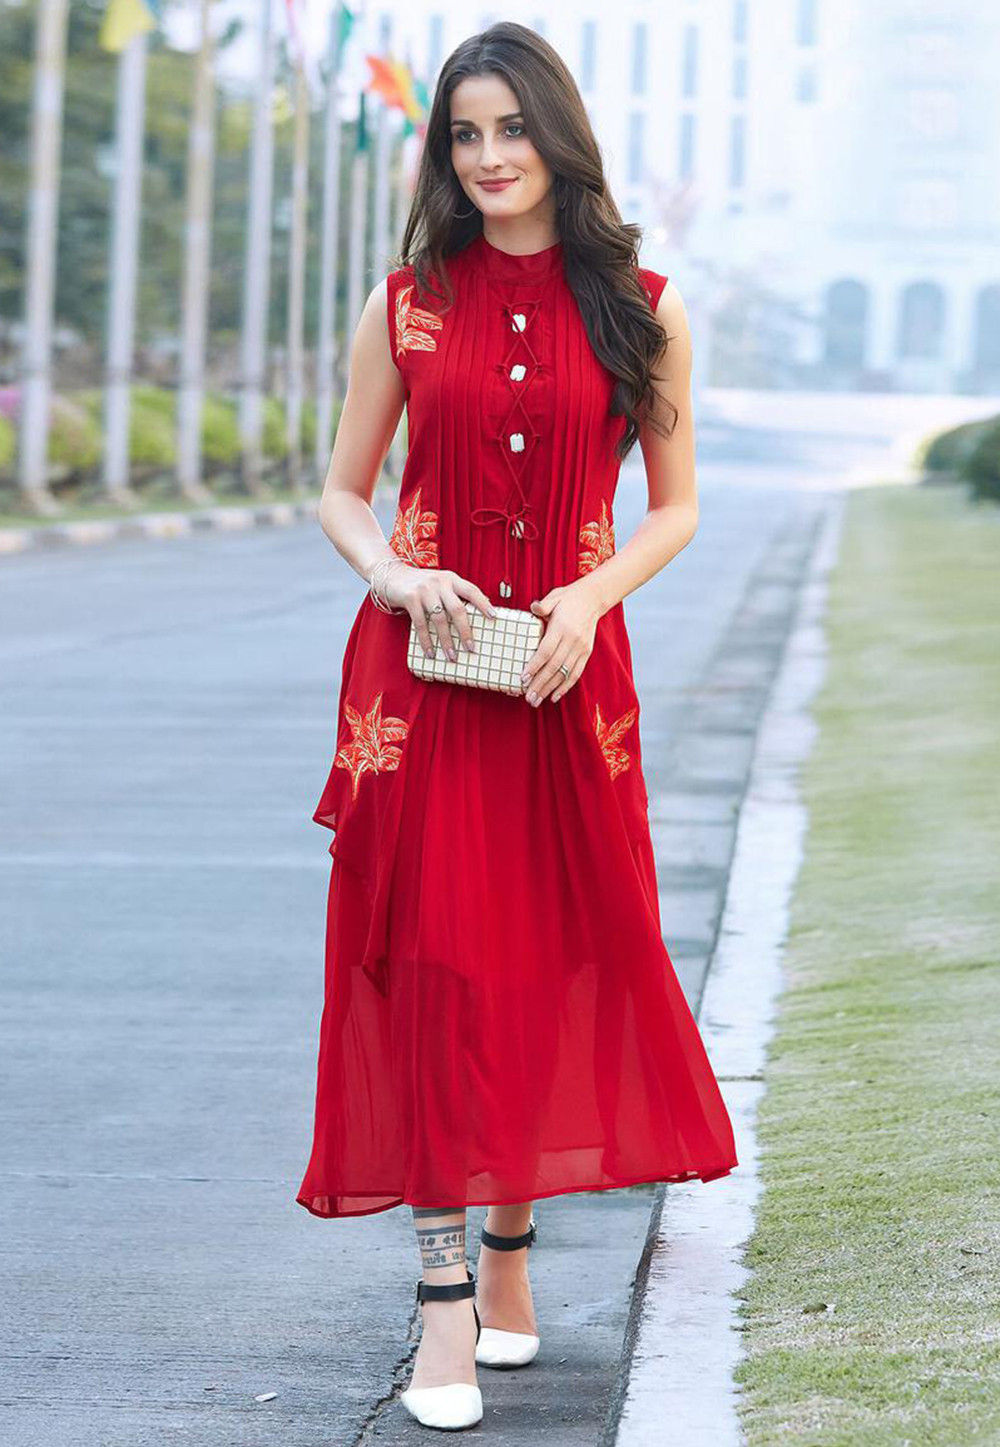 Embroidered Georgette Jacket Style Dress in Red